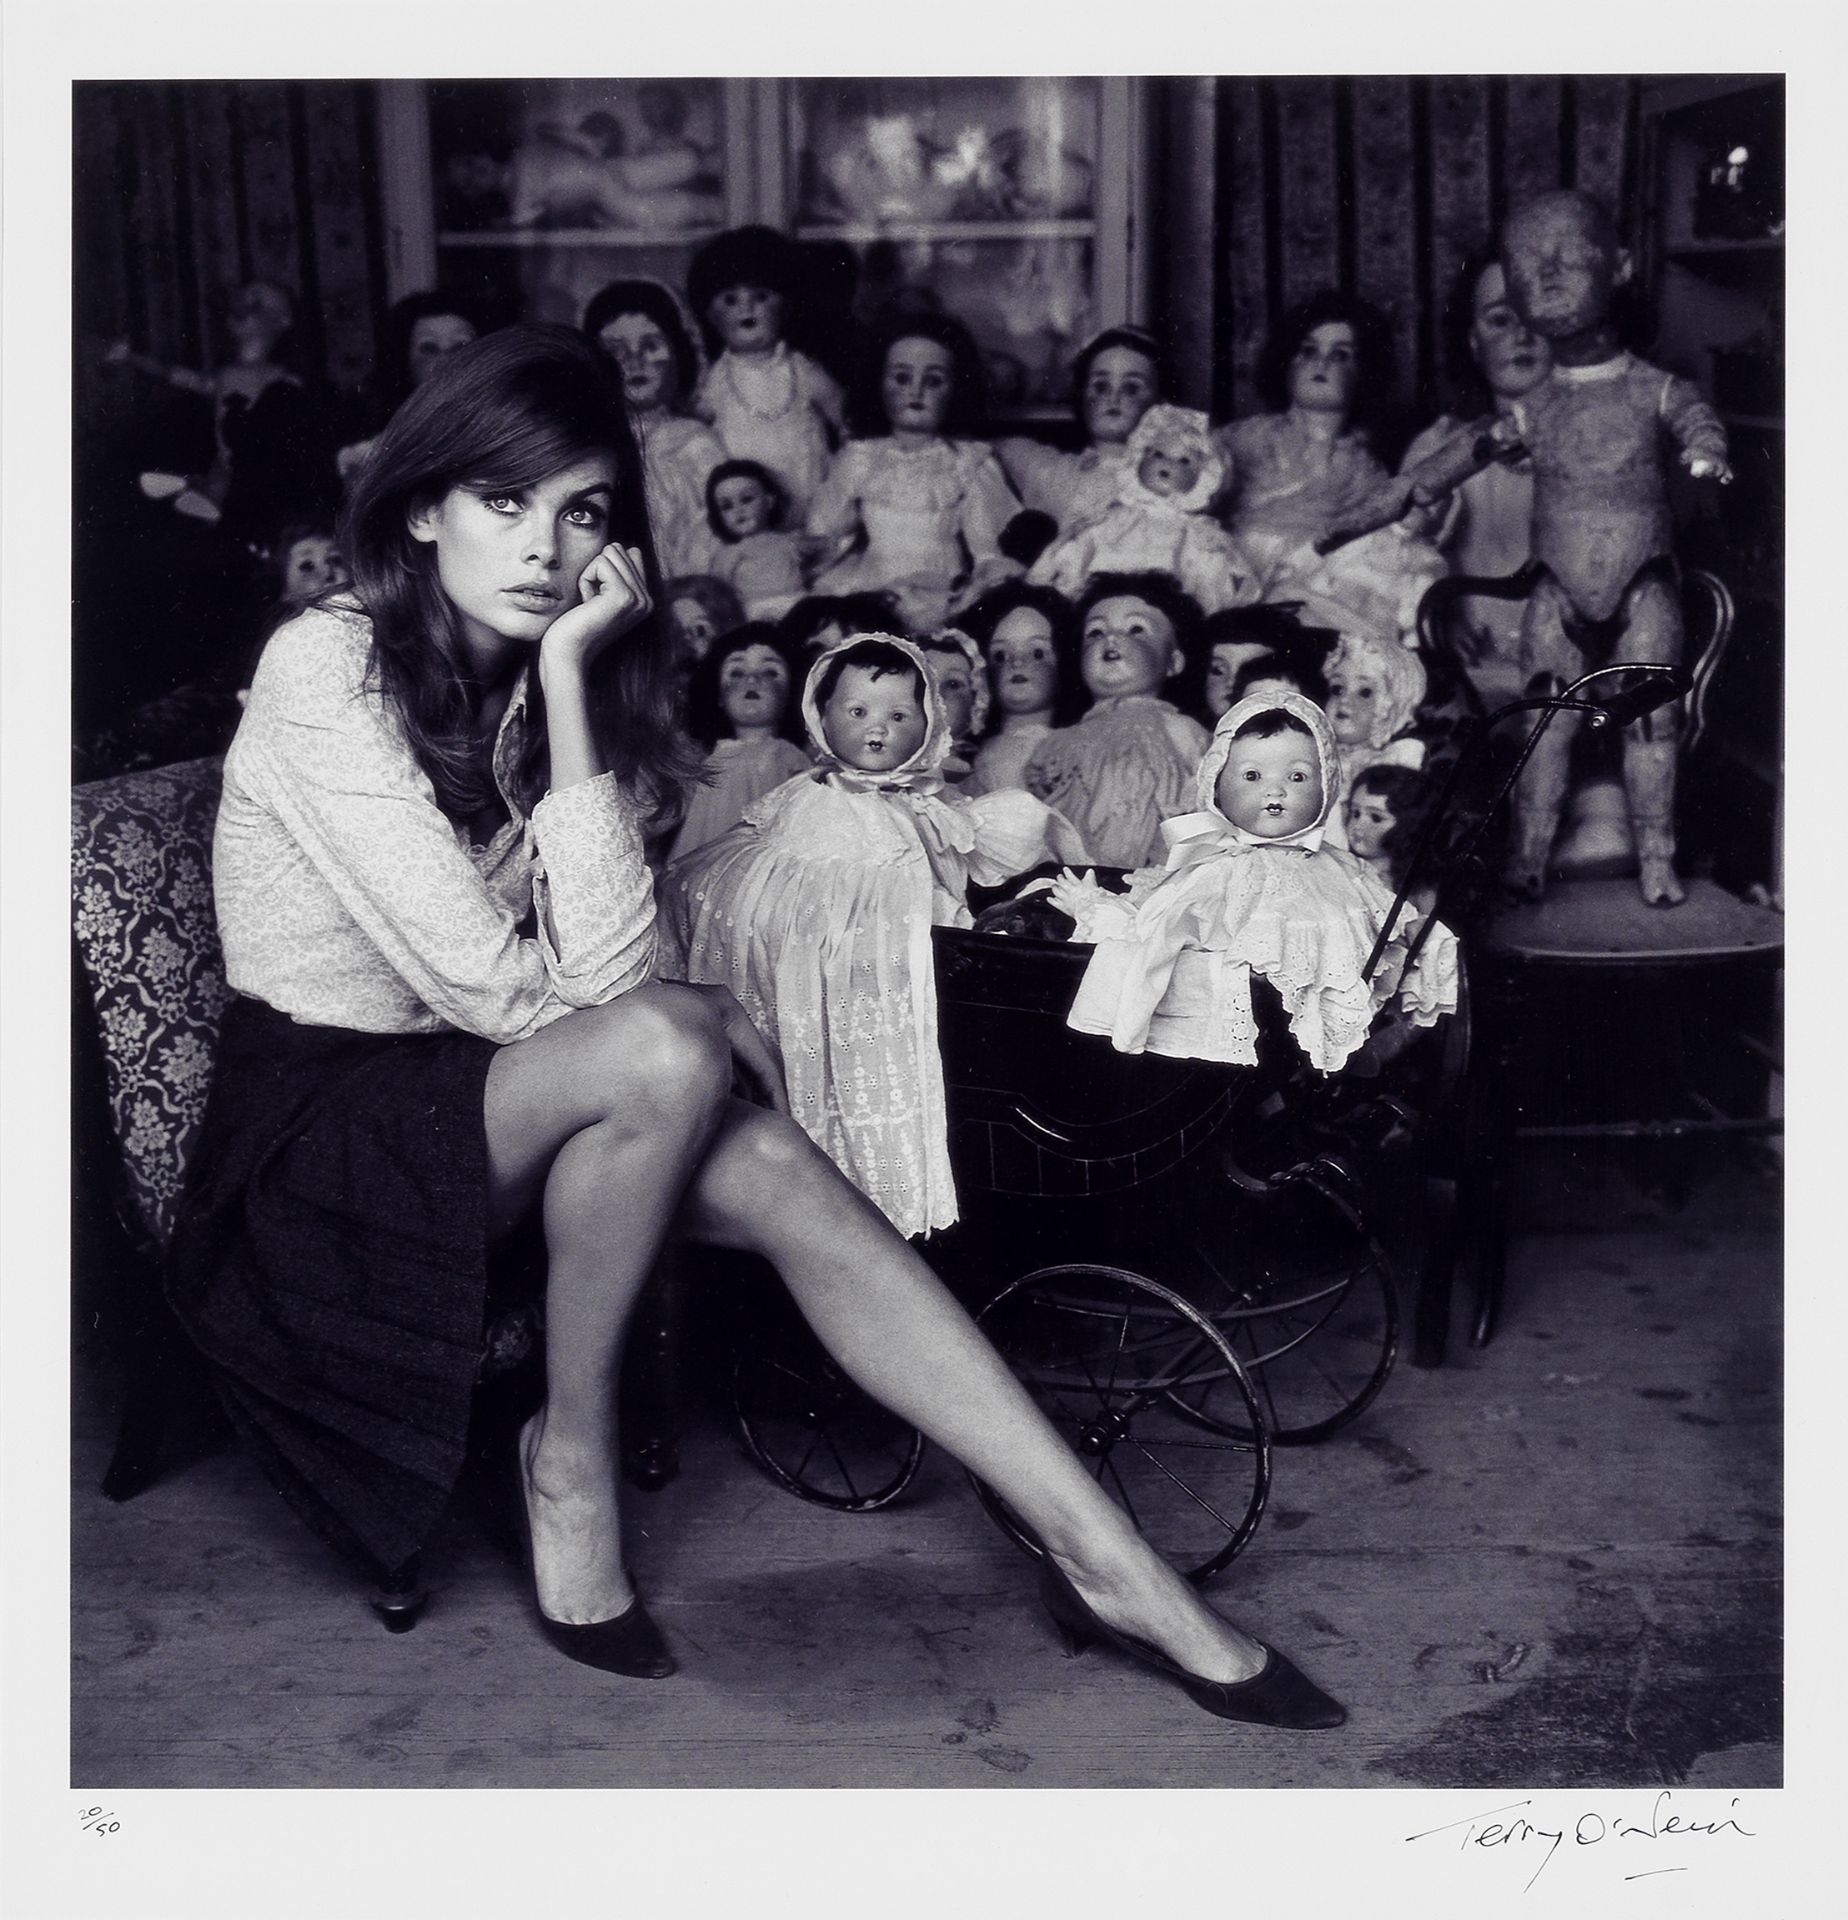 Terry O'Neill (British, 1938-2019) Jean Shrimpton With Dolls, 1964, printed later